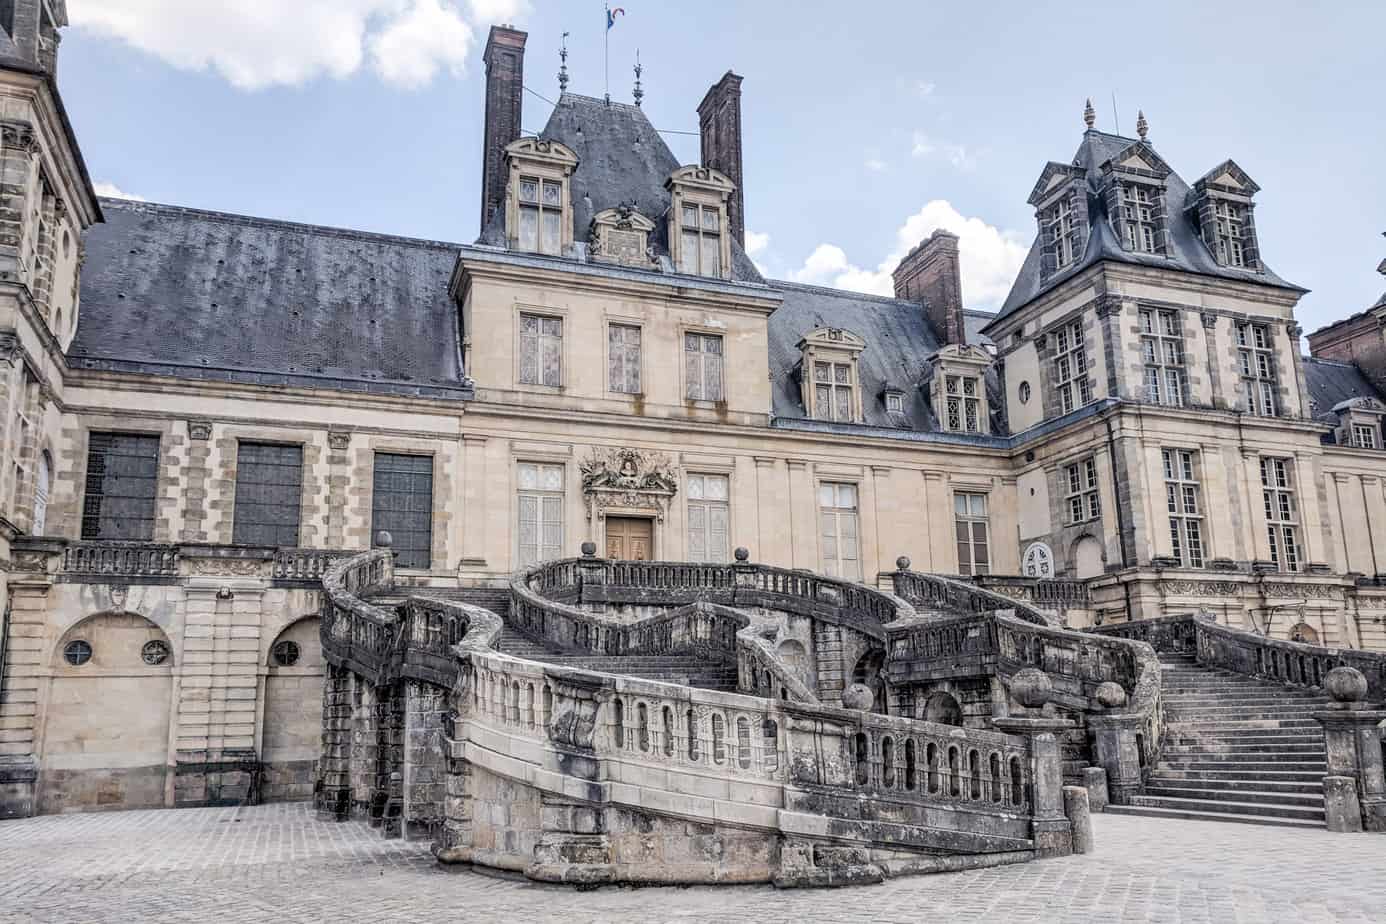 Exterior of Fontainebleau Chateau with horseshoe staircase leading to the former main entrance.